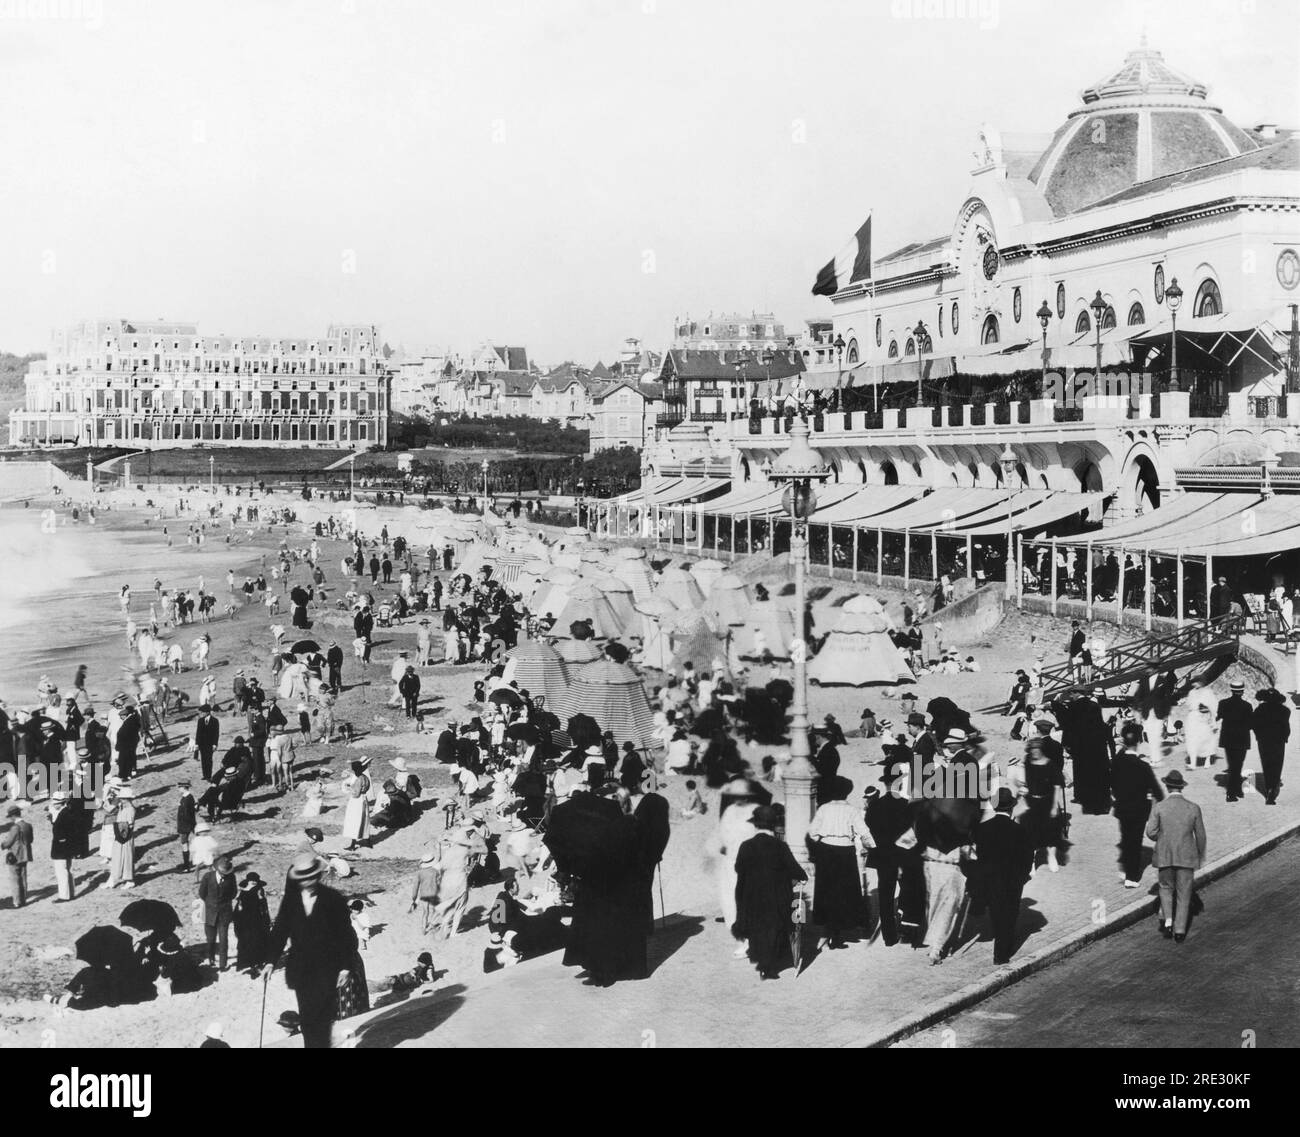 Biarritz, France:   c. 1928 The fashionable bathing beach at Biarritz on the Bay of Biscay in France. Stock Photo